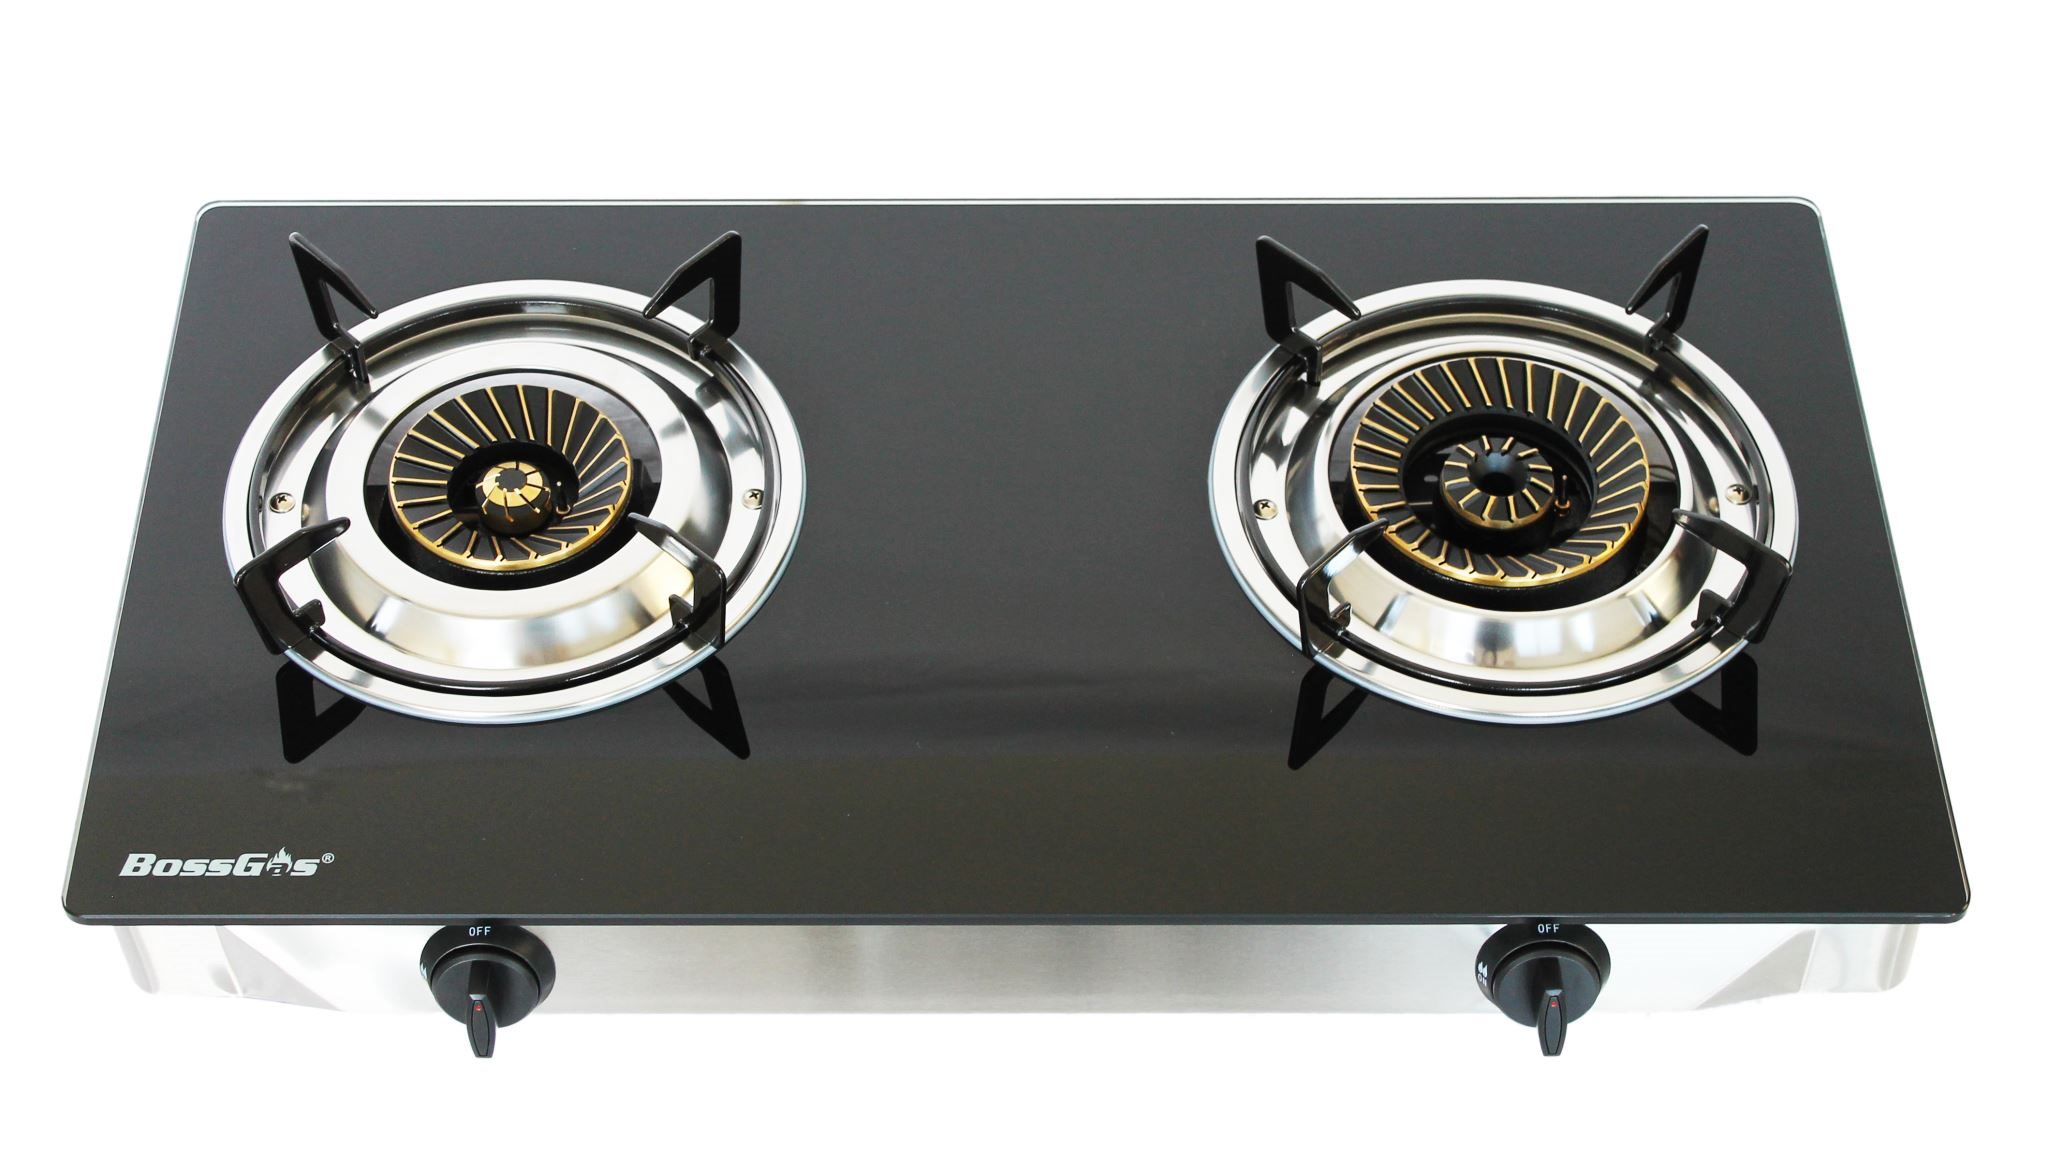 GLASS DOUBLE GAS STOVE